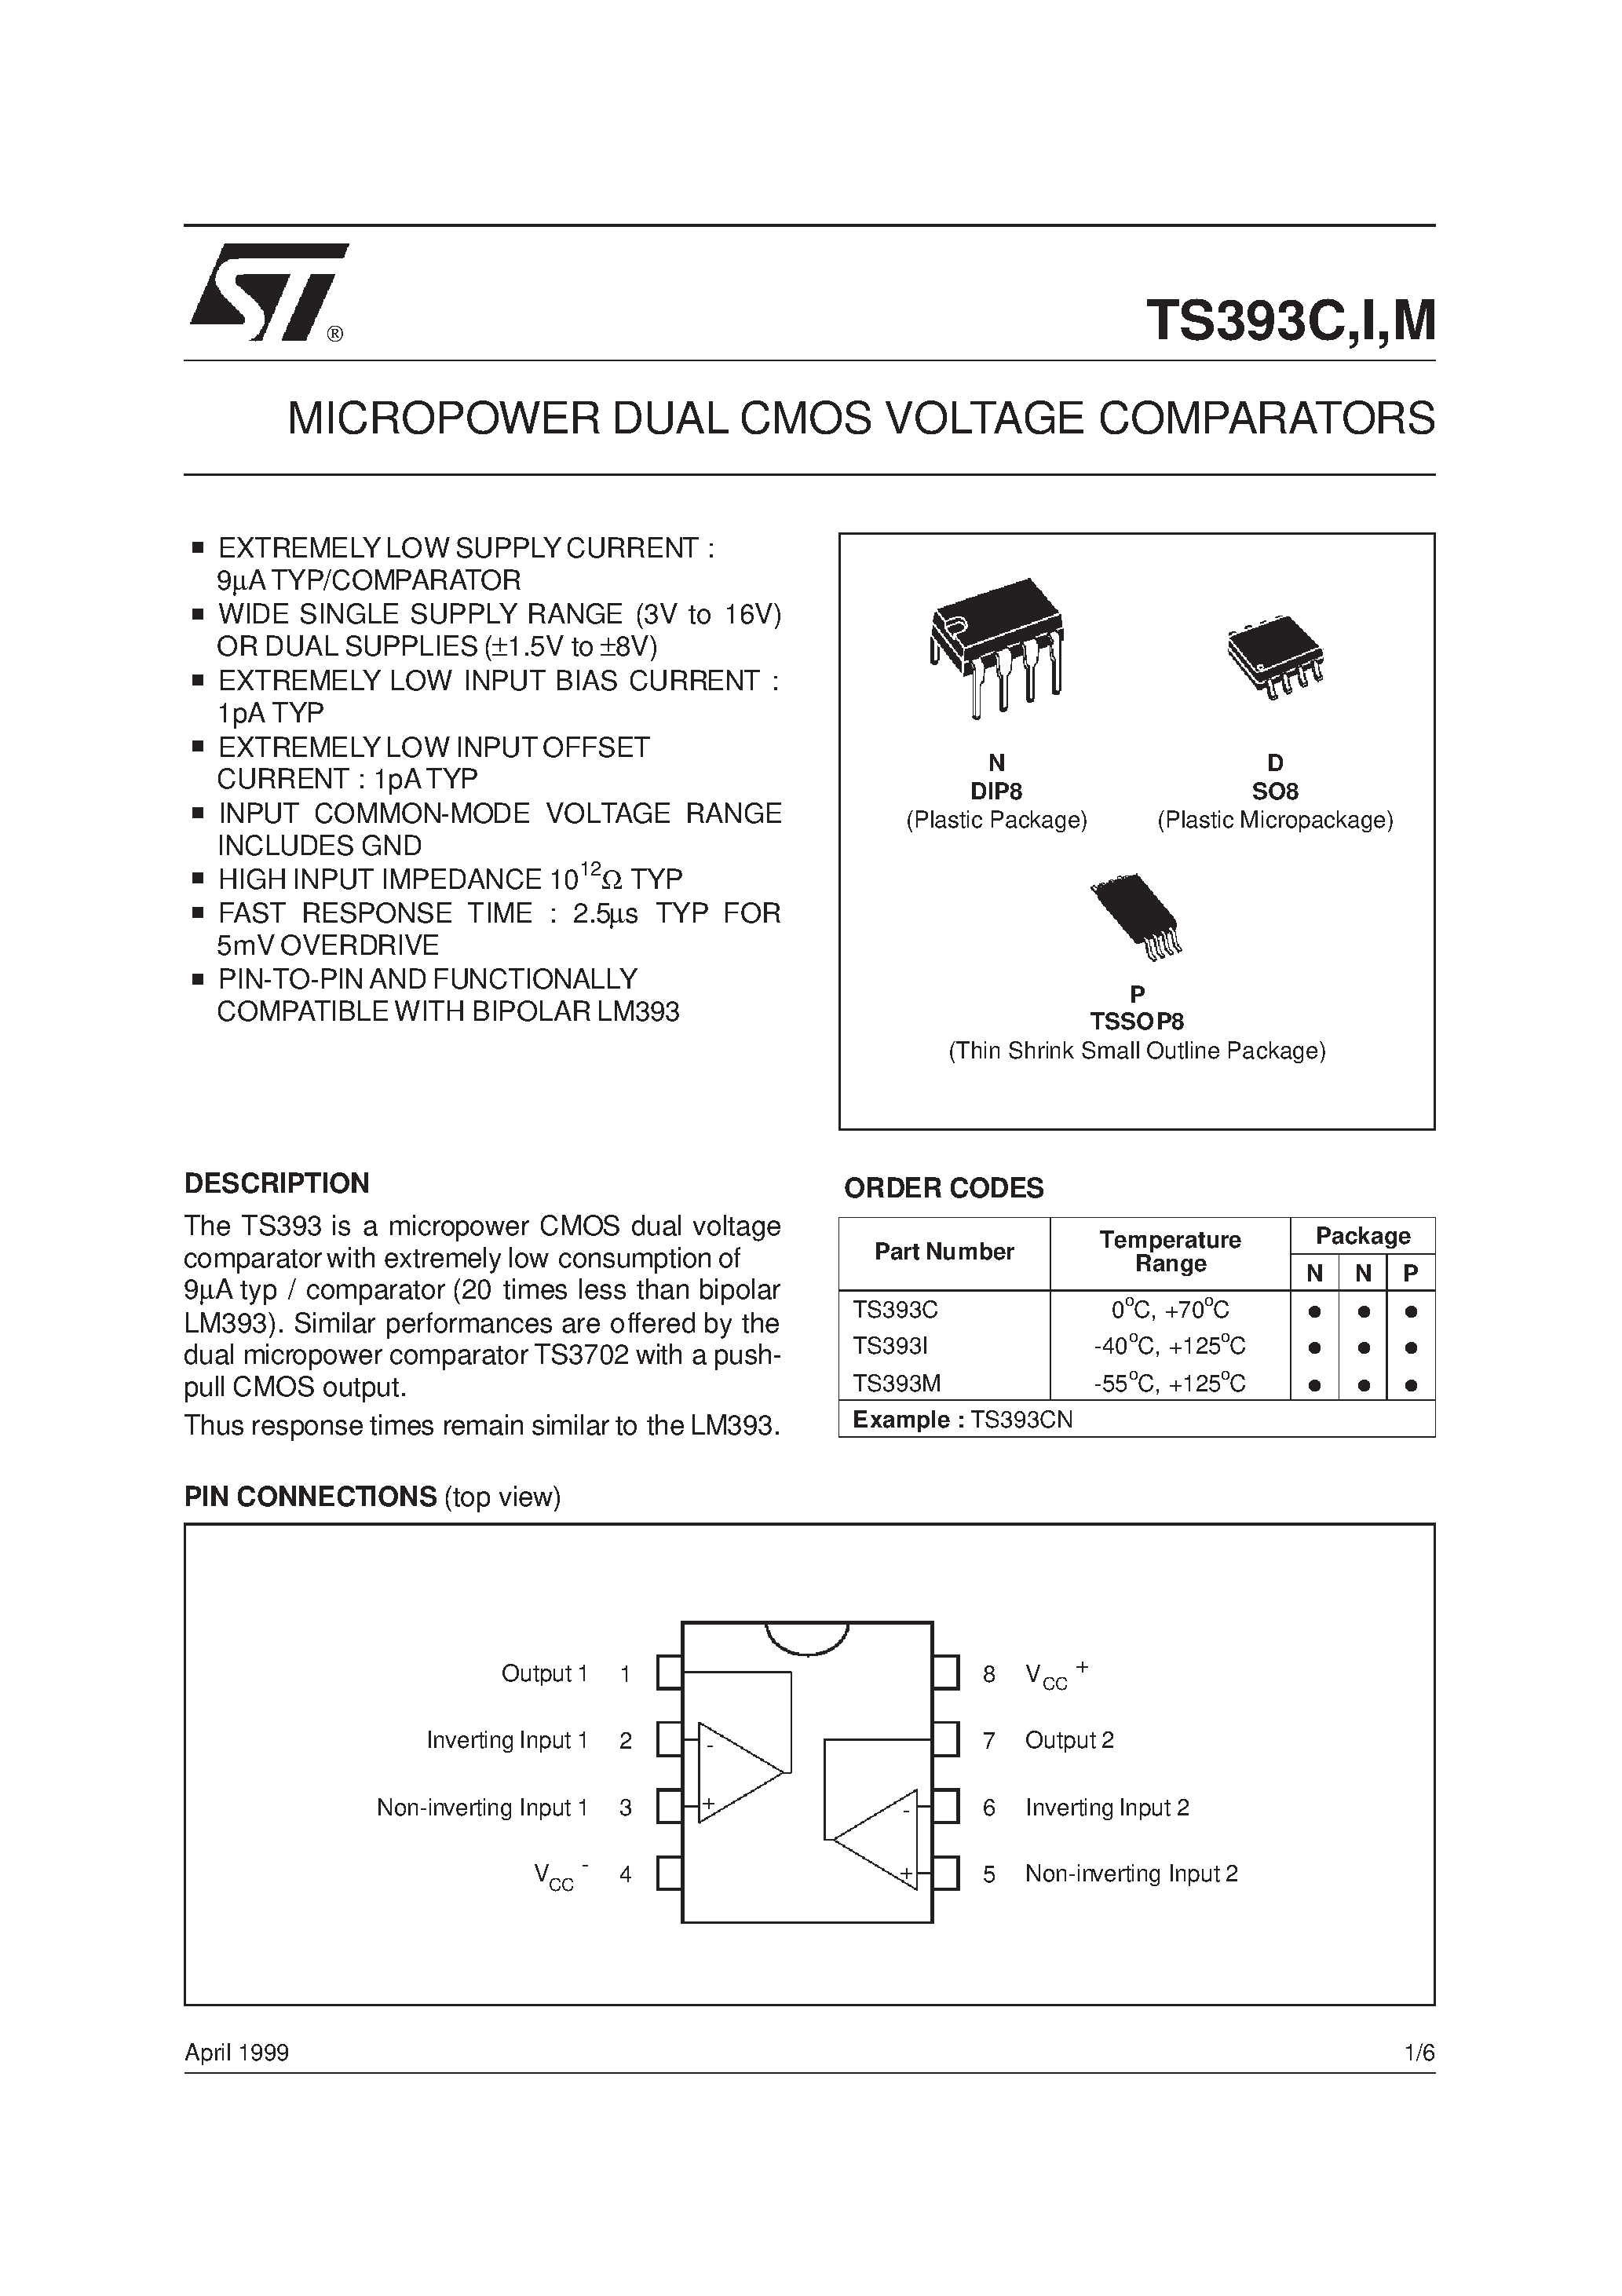 Datasheet TS393I - MICROPOWER DUAL CMOS VOLTAGE COMPARATORS page 1